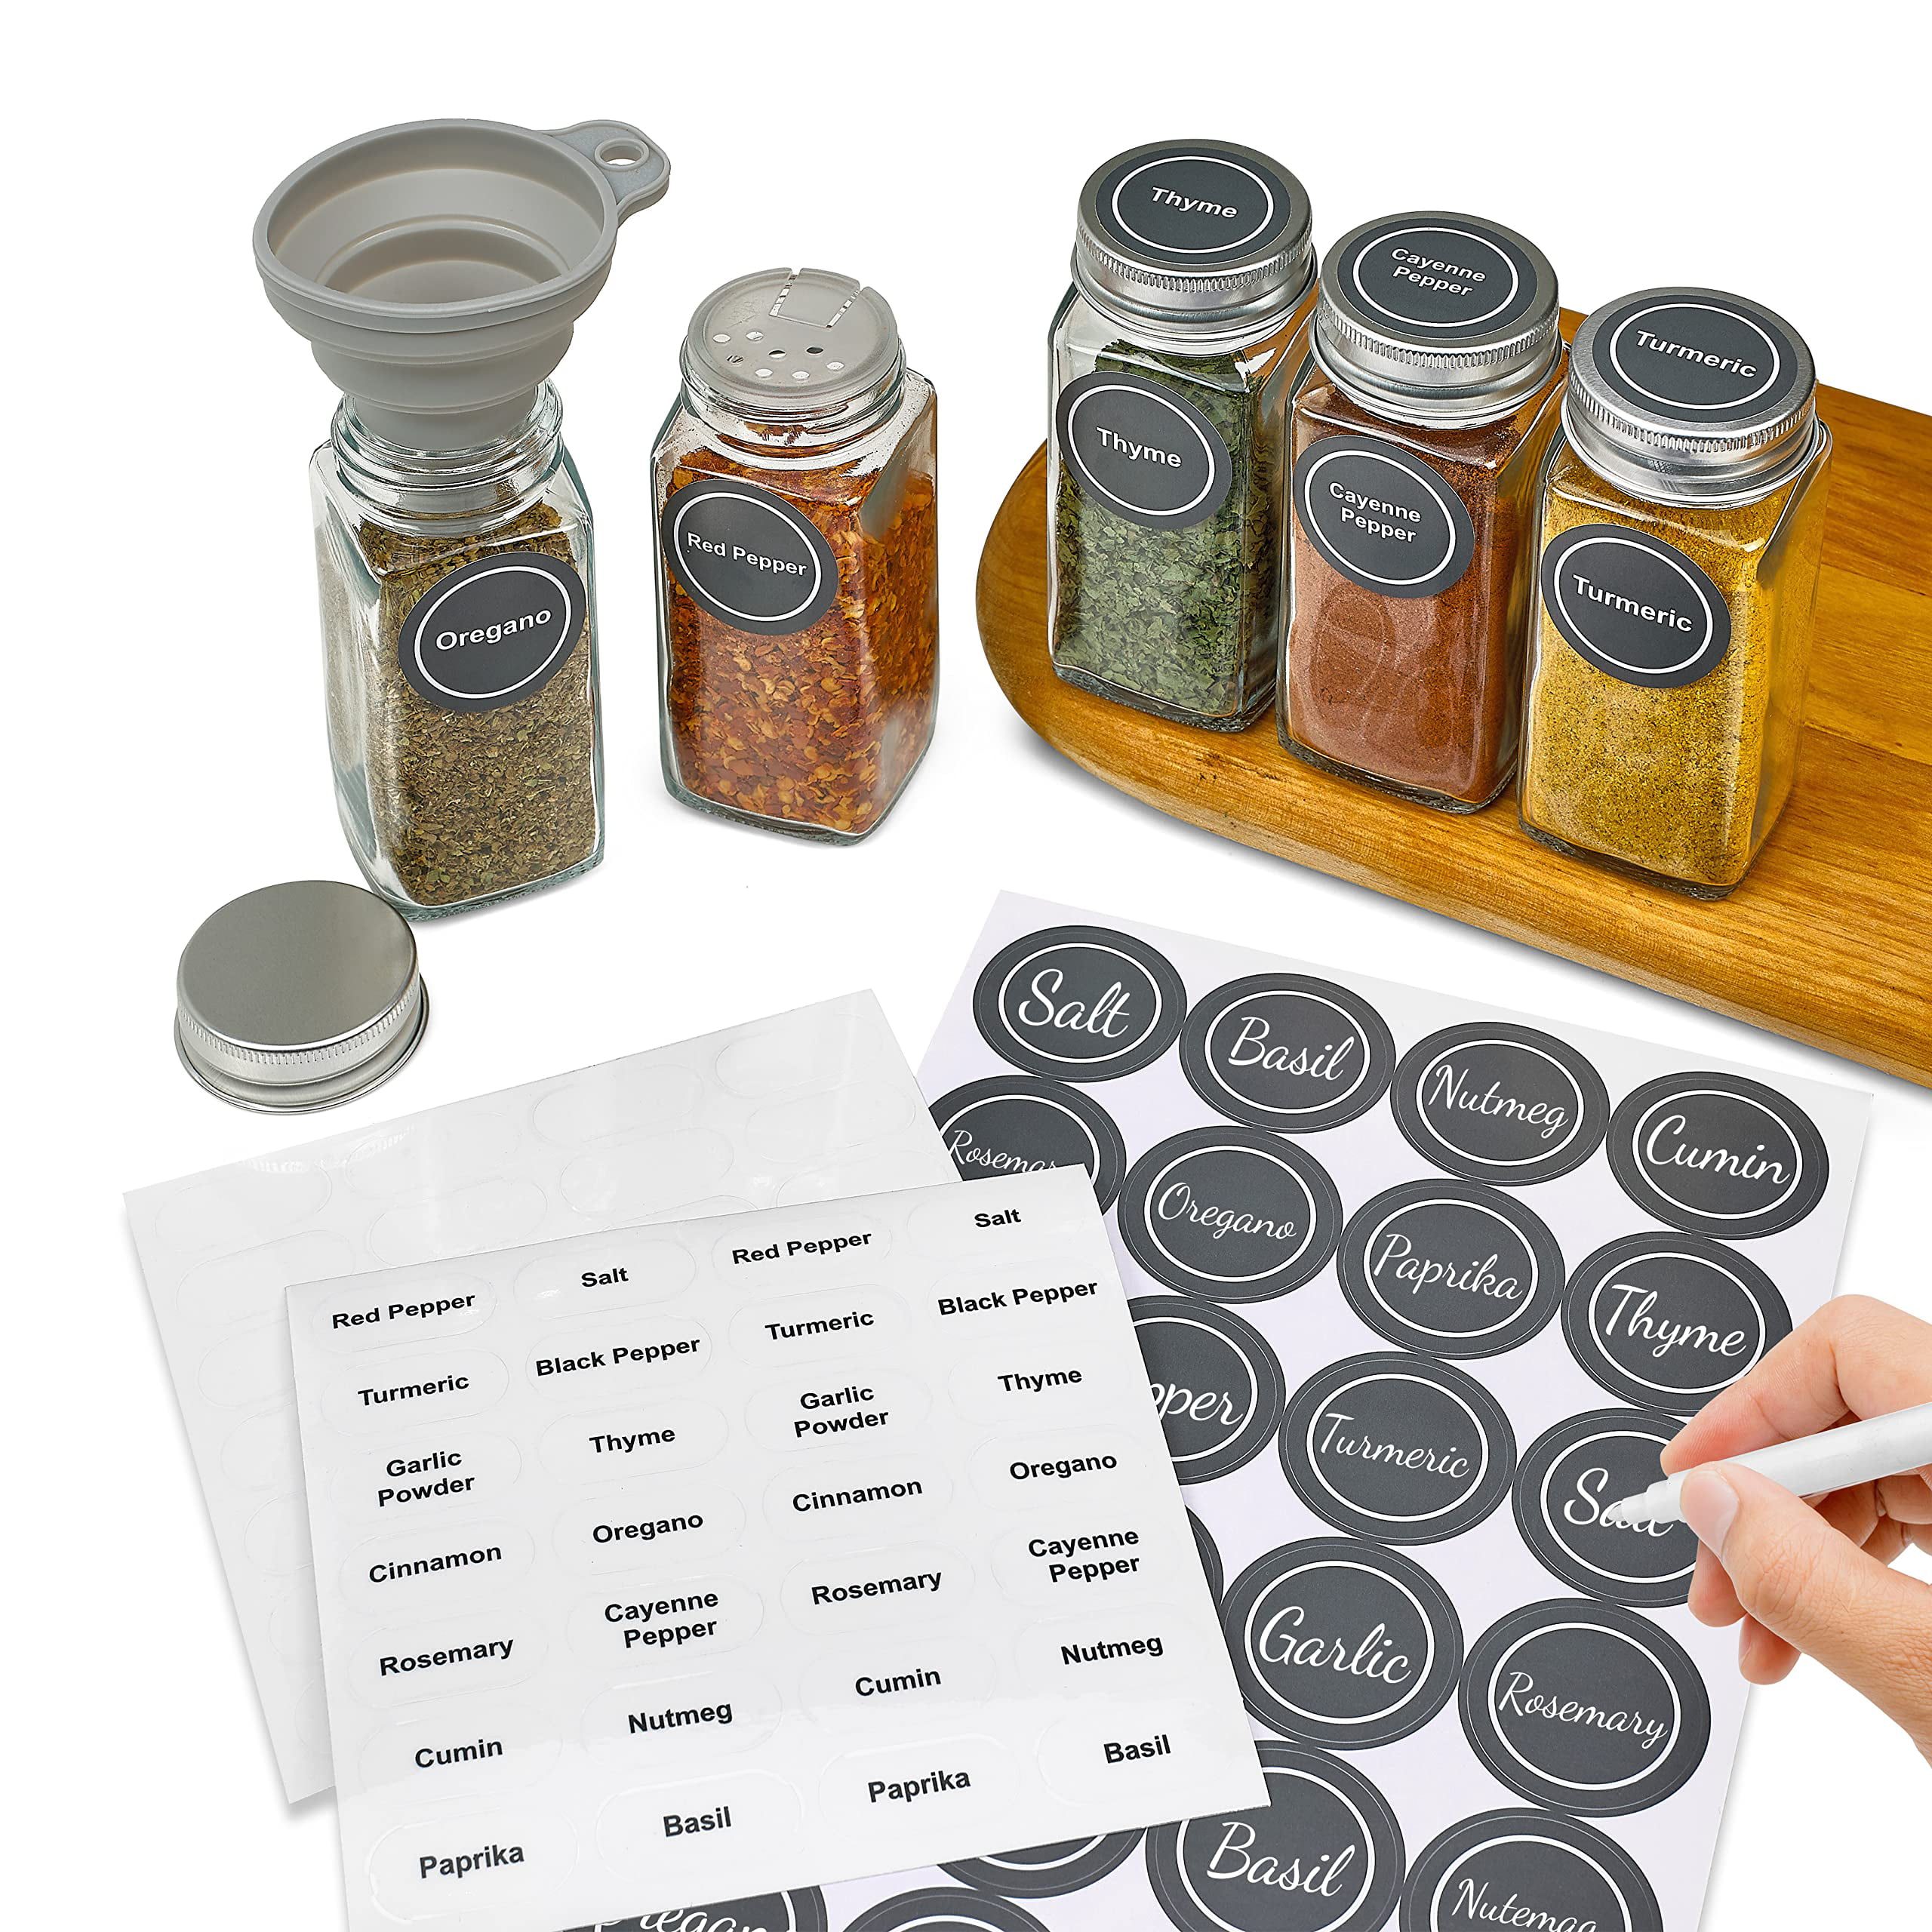 36 Spice Jars with Labels- Glass Spice Jars with Black Metal Caps